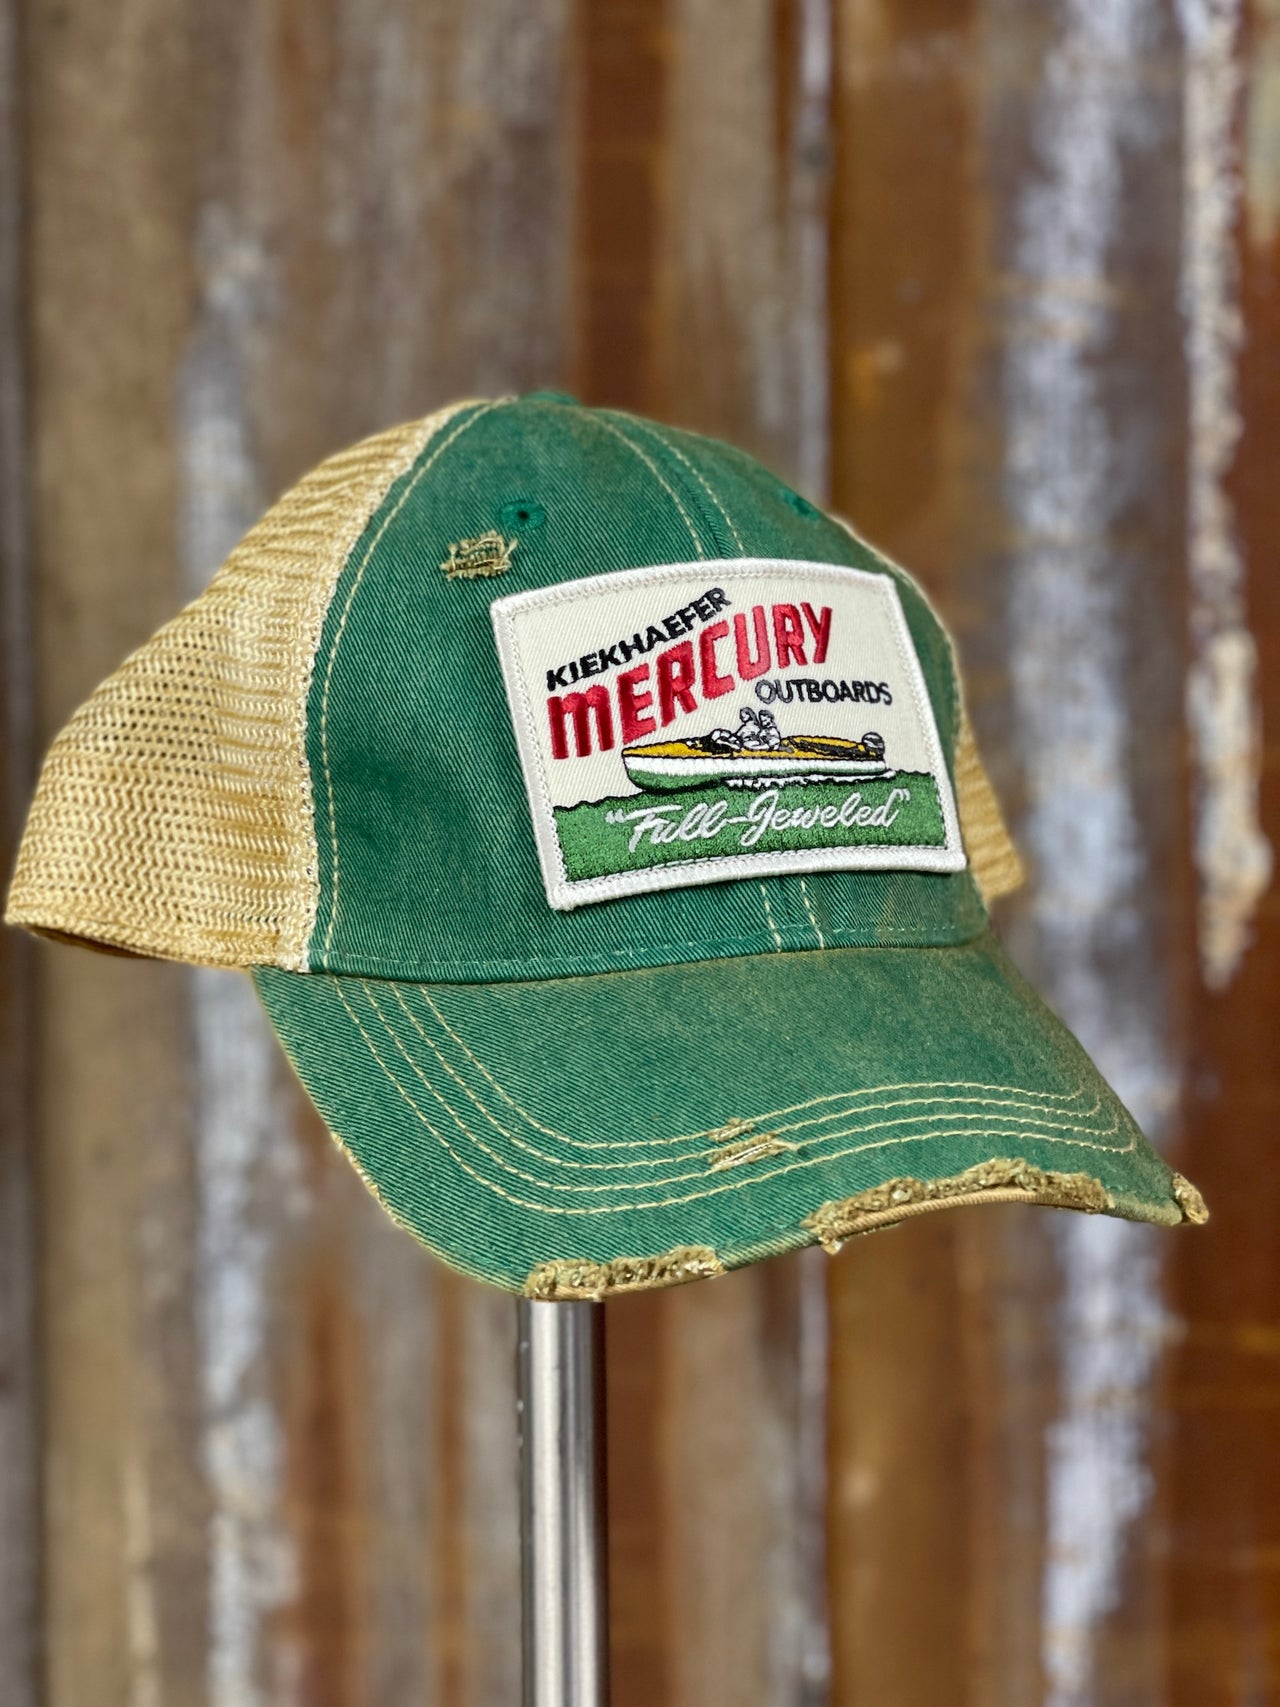 Retro Outboard Hat "rectangle" - Distressed Kelly Green